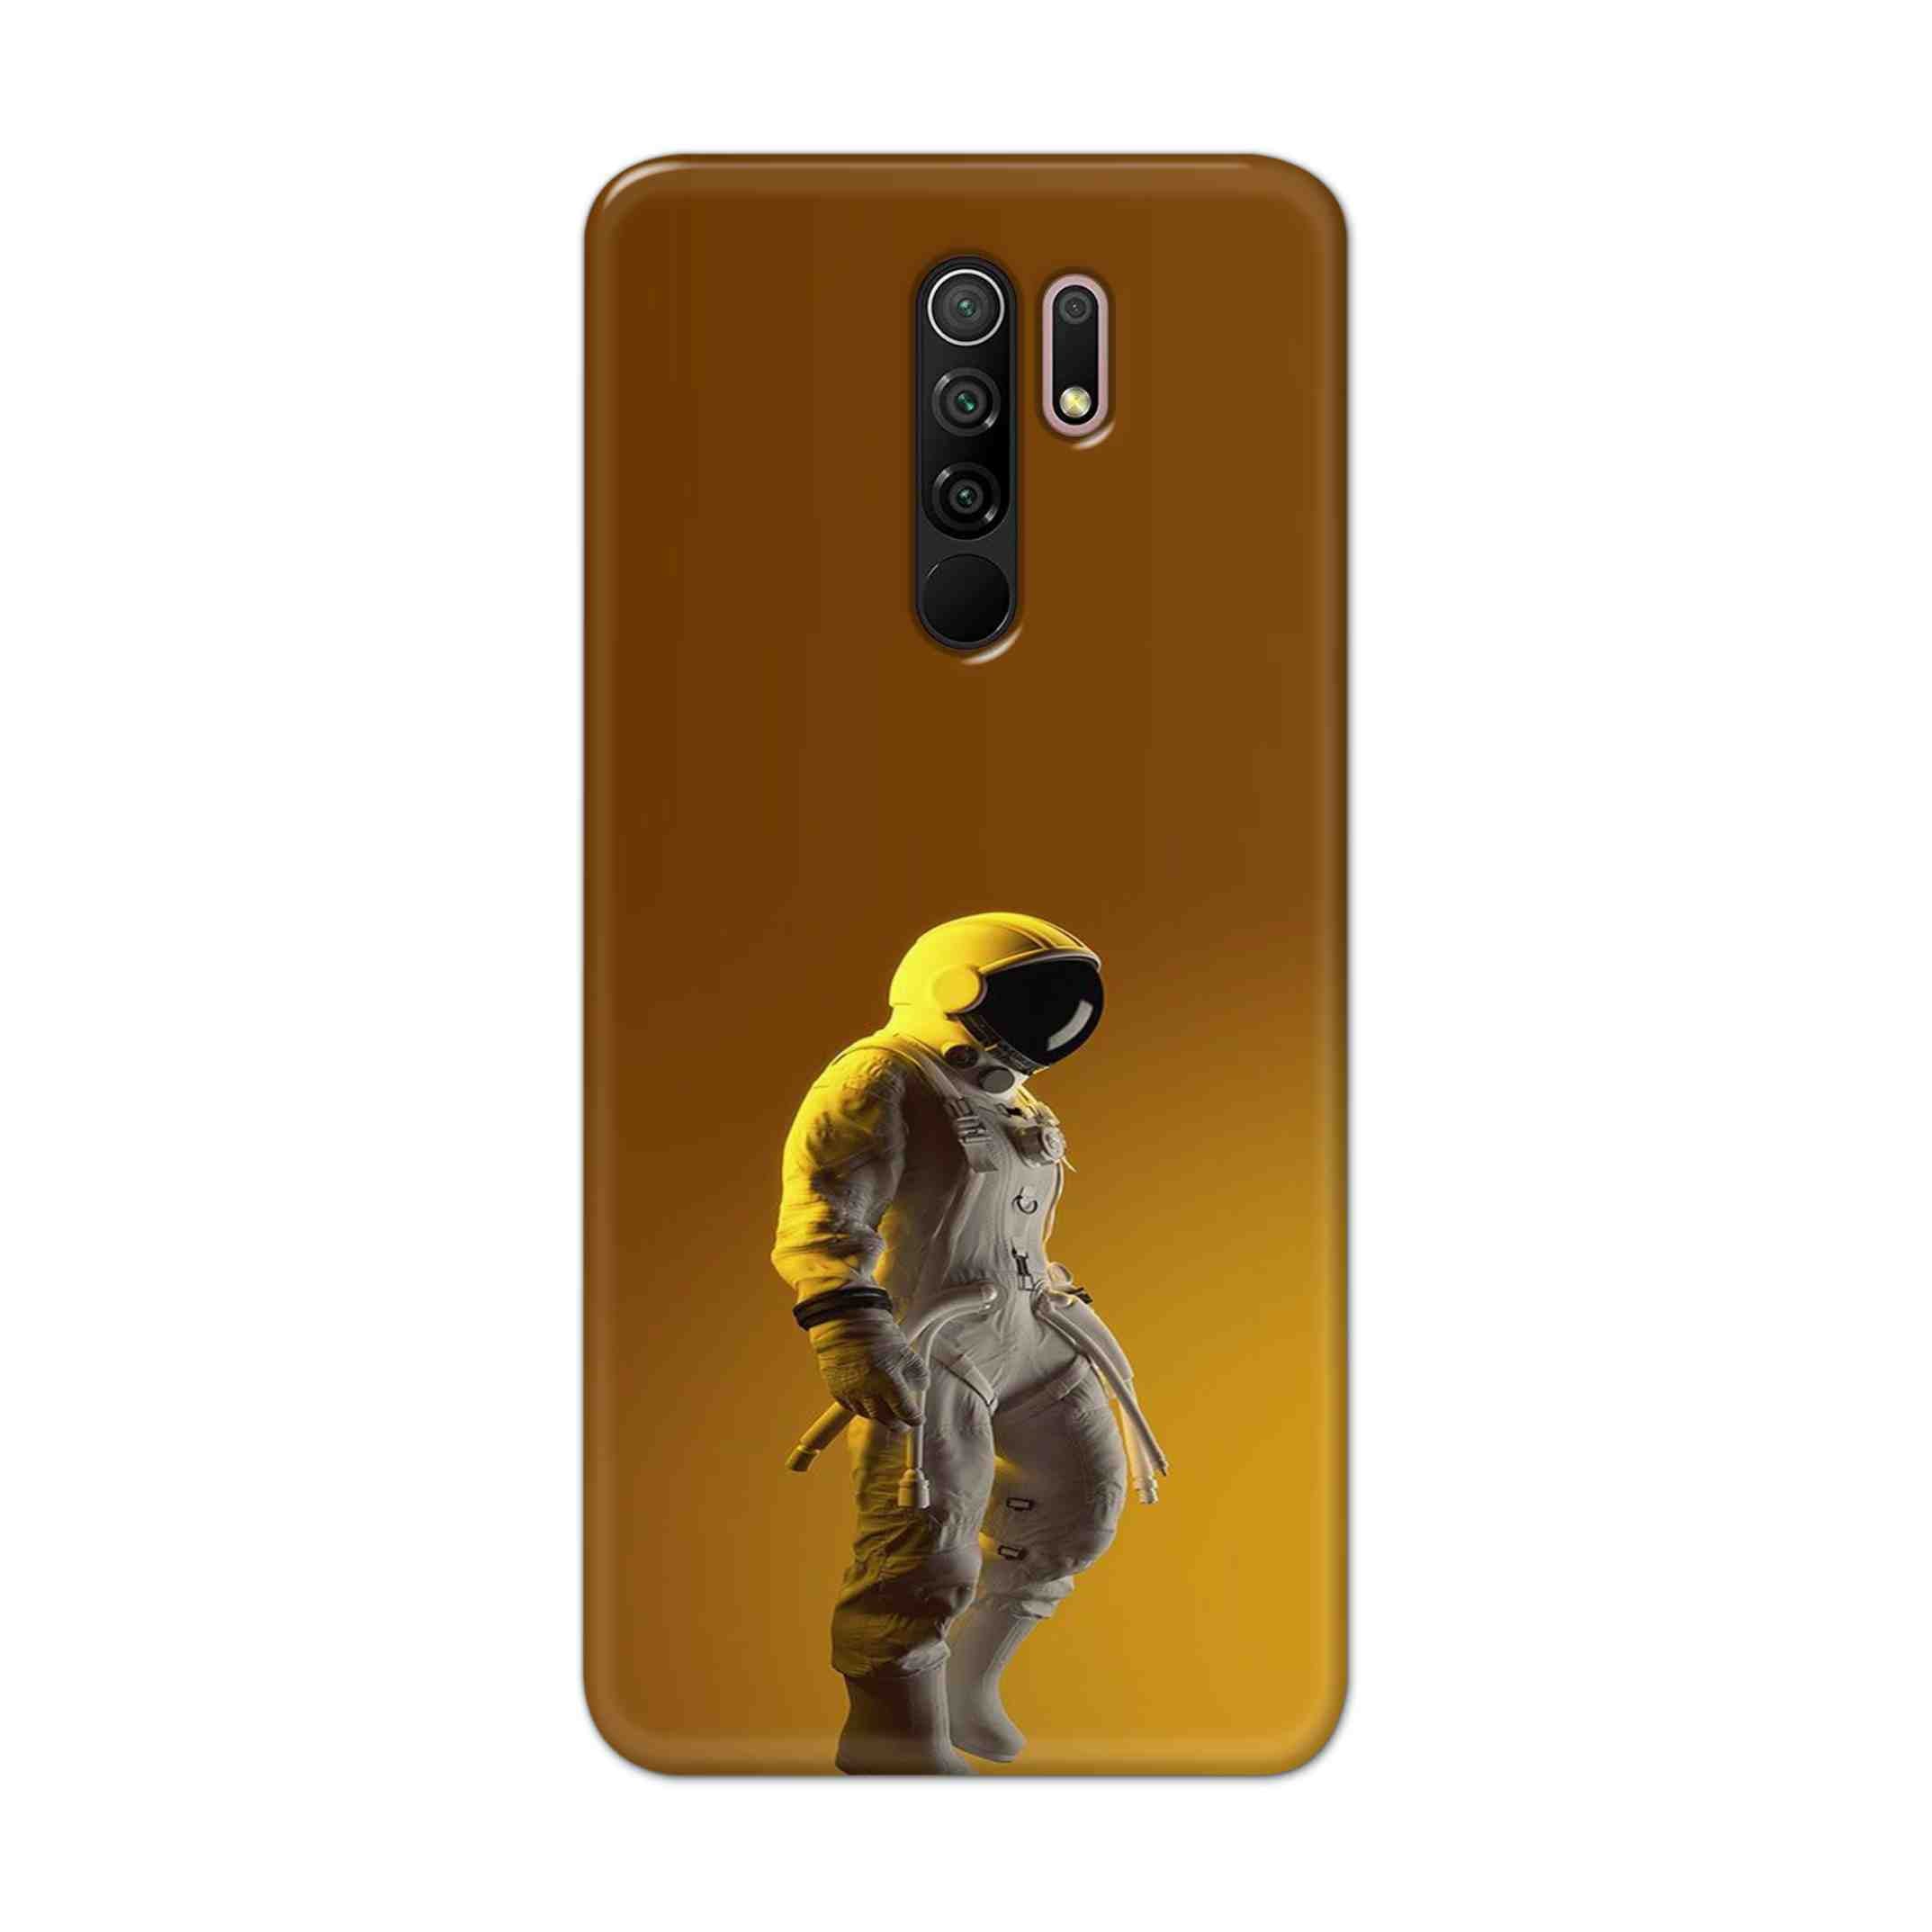 Buy Yellow Astronaut Hard Back Mobile Phone Case Cover For Xiaomi Redmi 9 Prime Online